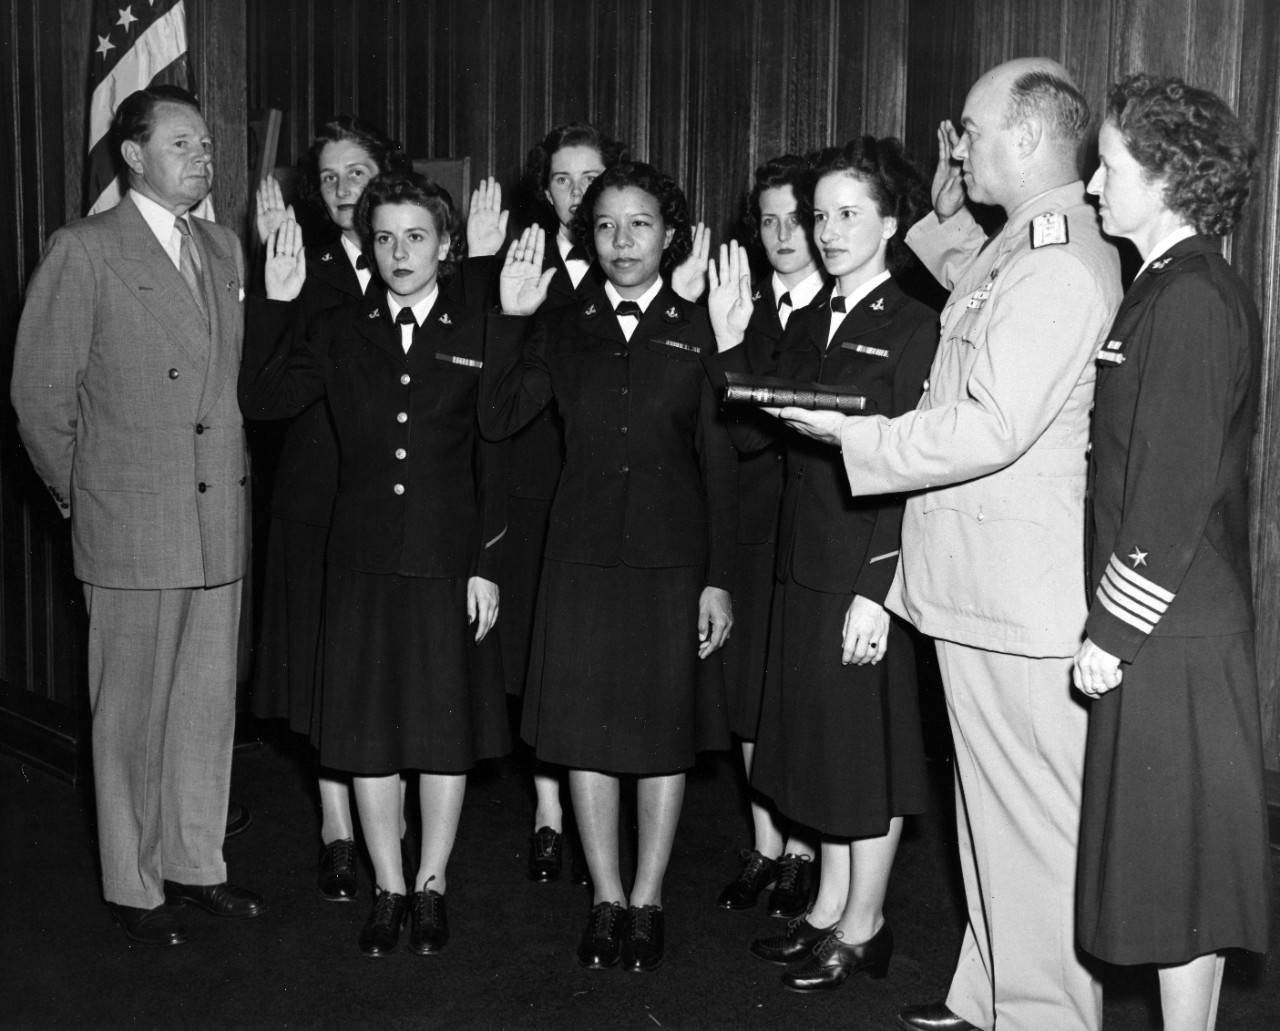 The first six enlisted women